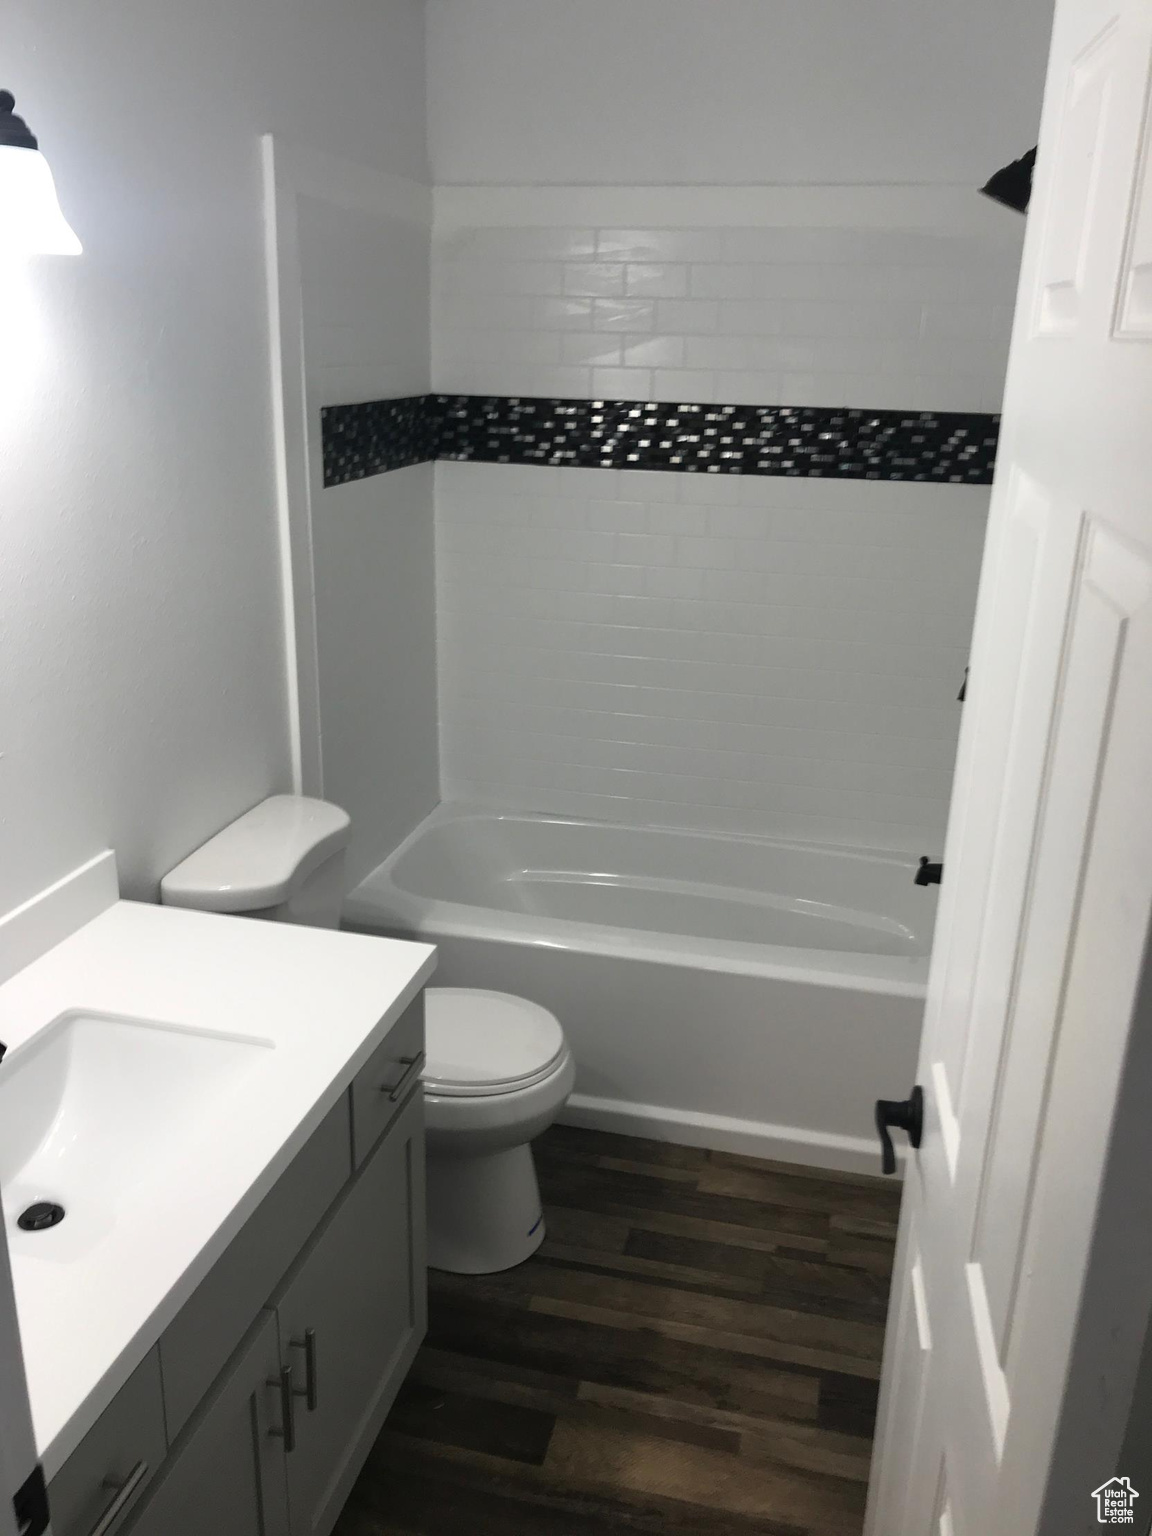 Full bathroom featuring tiled shower / bath combo, wood-type flooring, vanity, and toilet